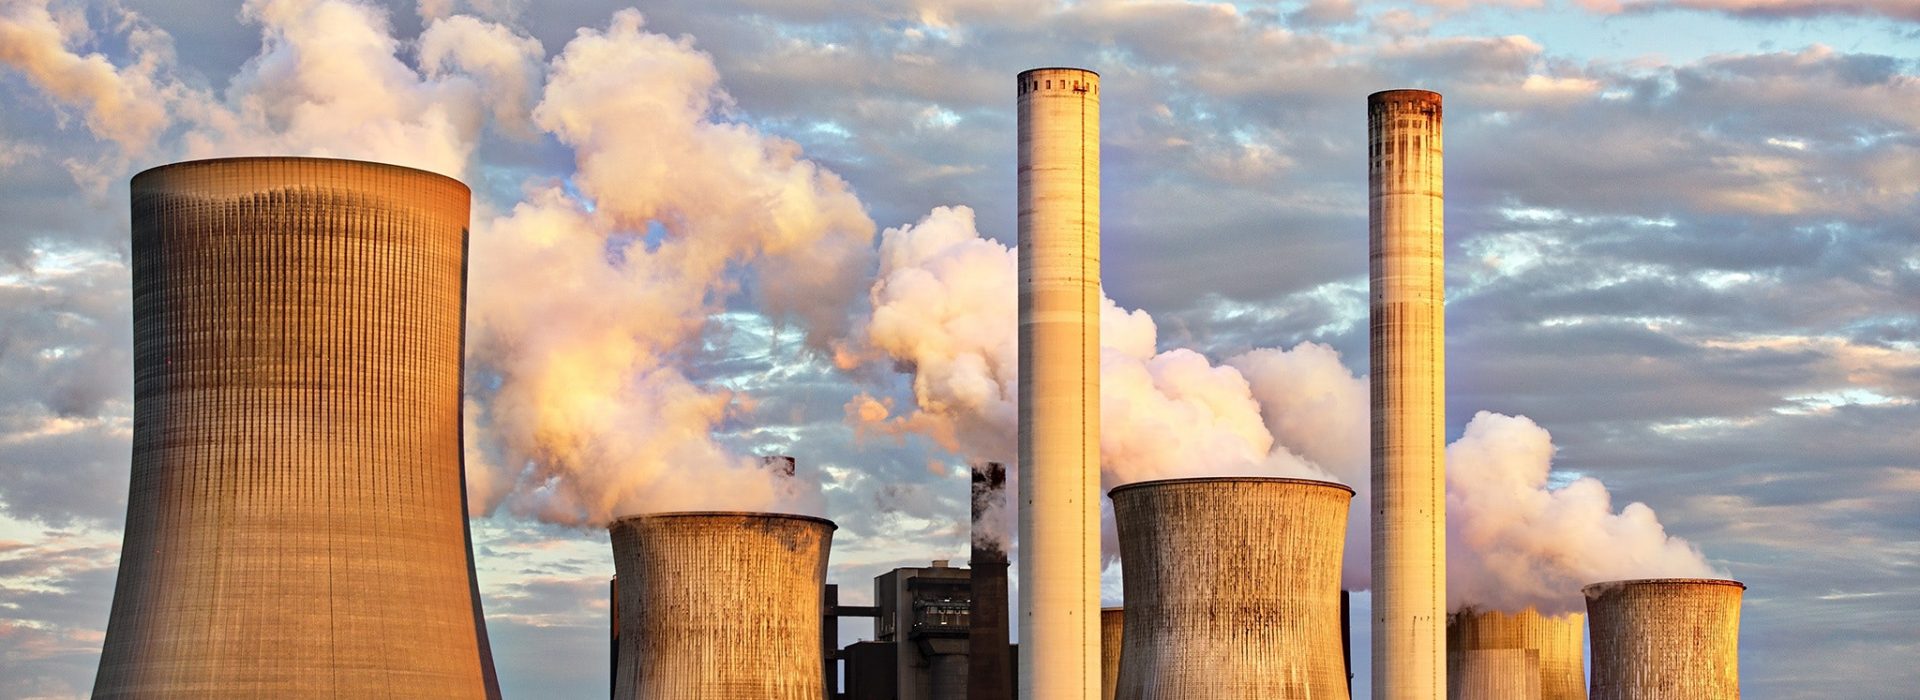 air-pollution-chimney-clouds-459728